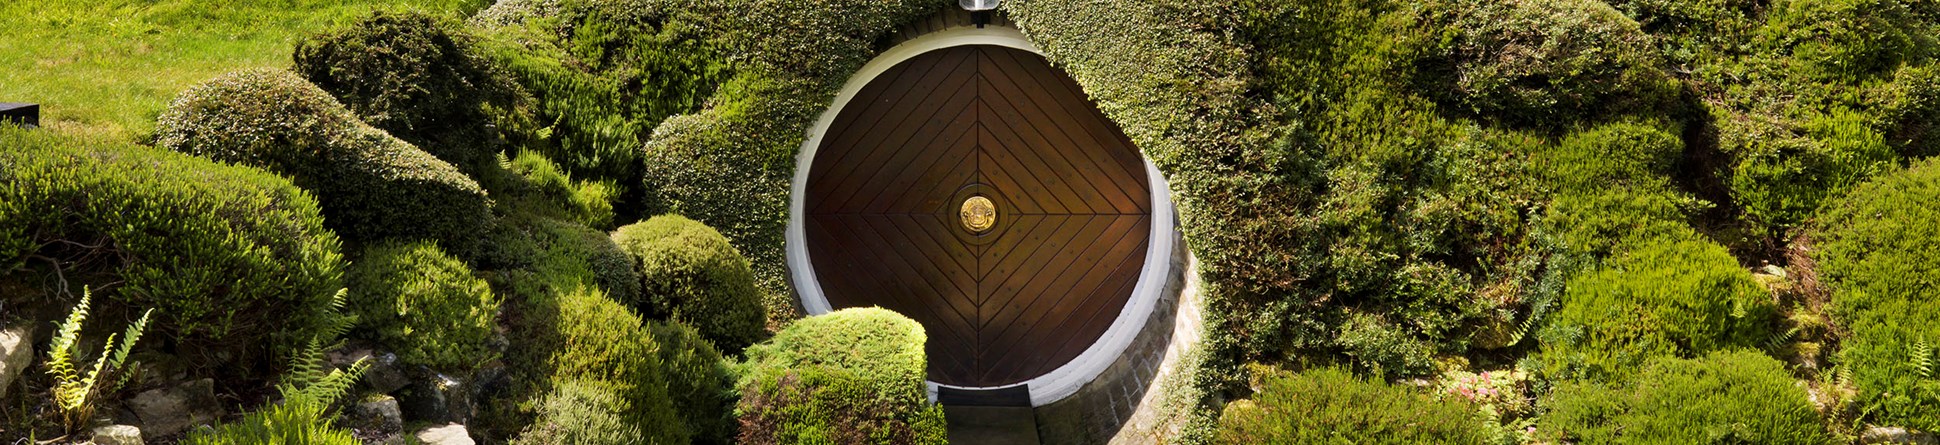 Image of the entrance to Underhill in Holme, West Yorkshire. Designed by Arthur Quarmby, Underhill is Britain’s first modern earth-sheltered house and has been described as a luxury hobbit’s home because of its captivating design.